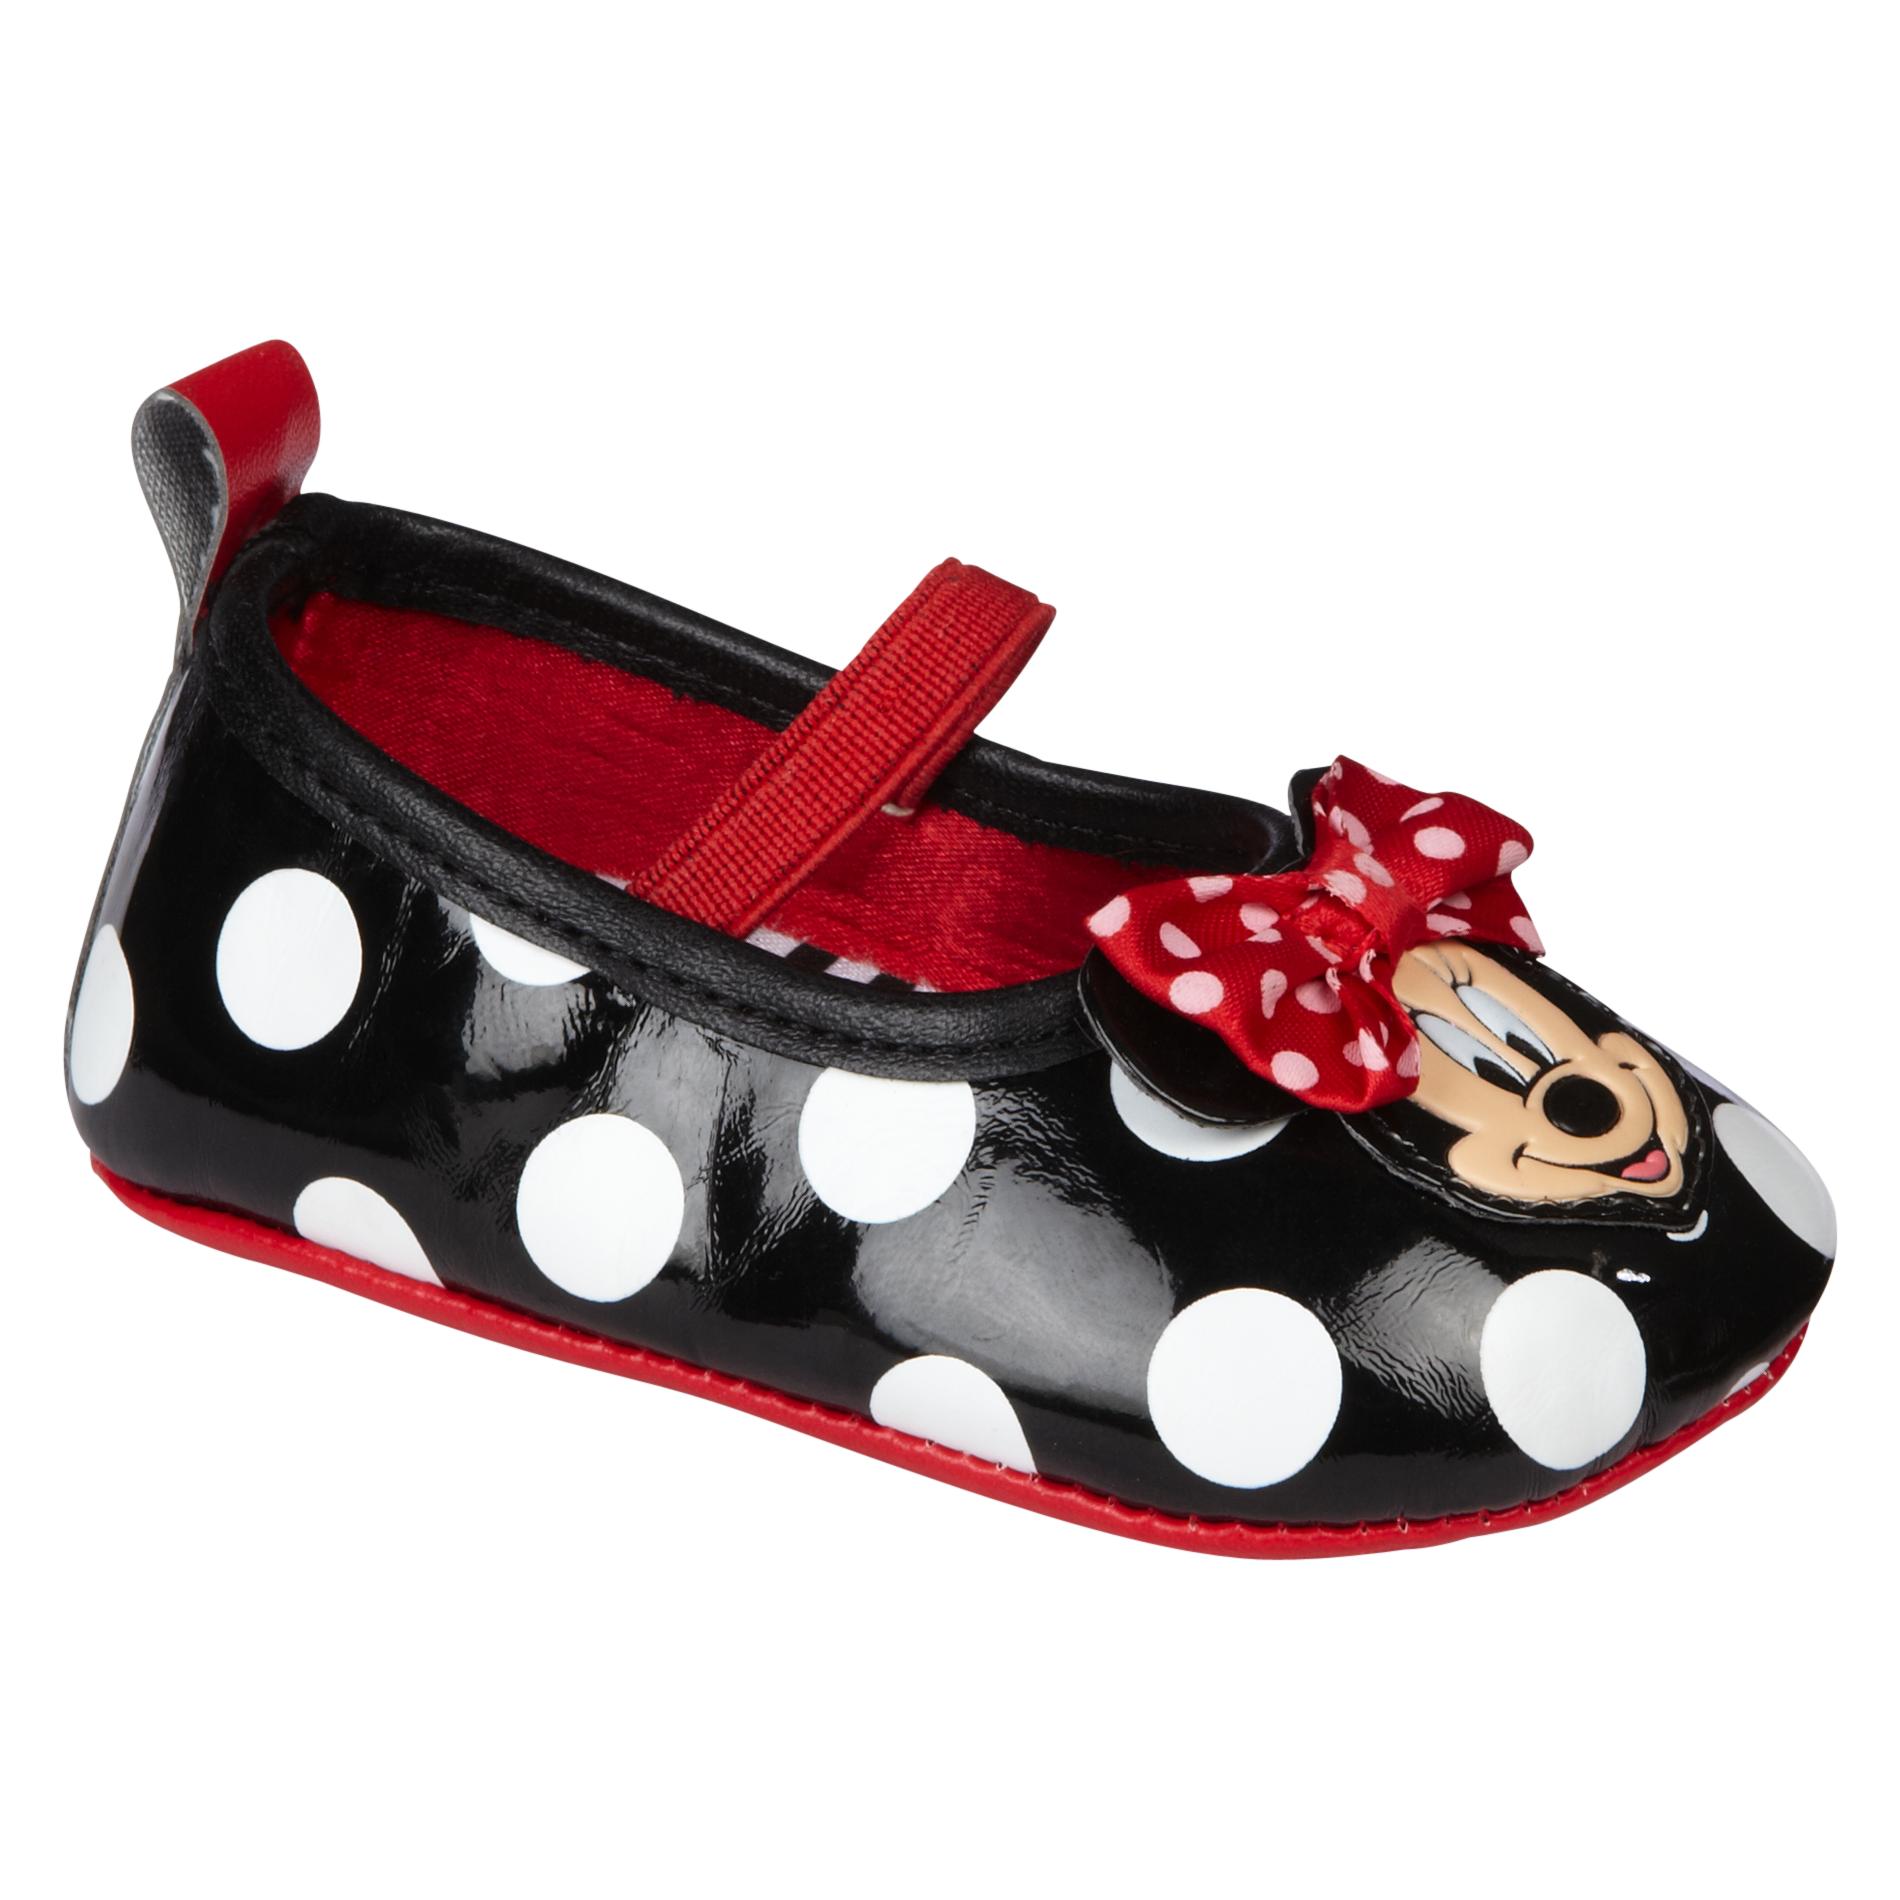 Disney Baby Girl's Casual Minnie Ballet - Black/White/Red